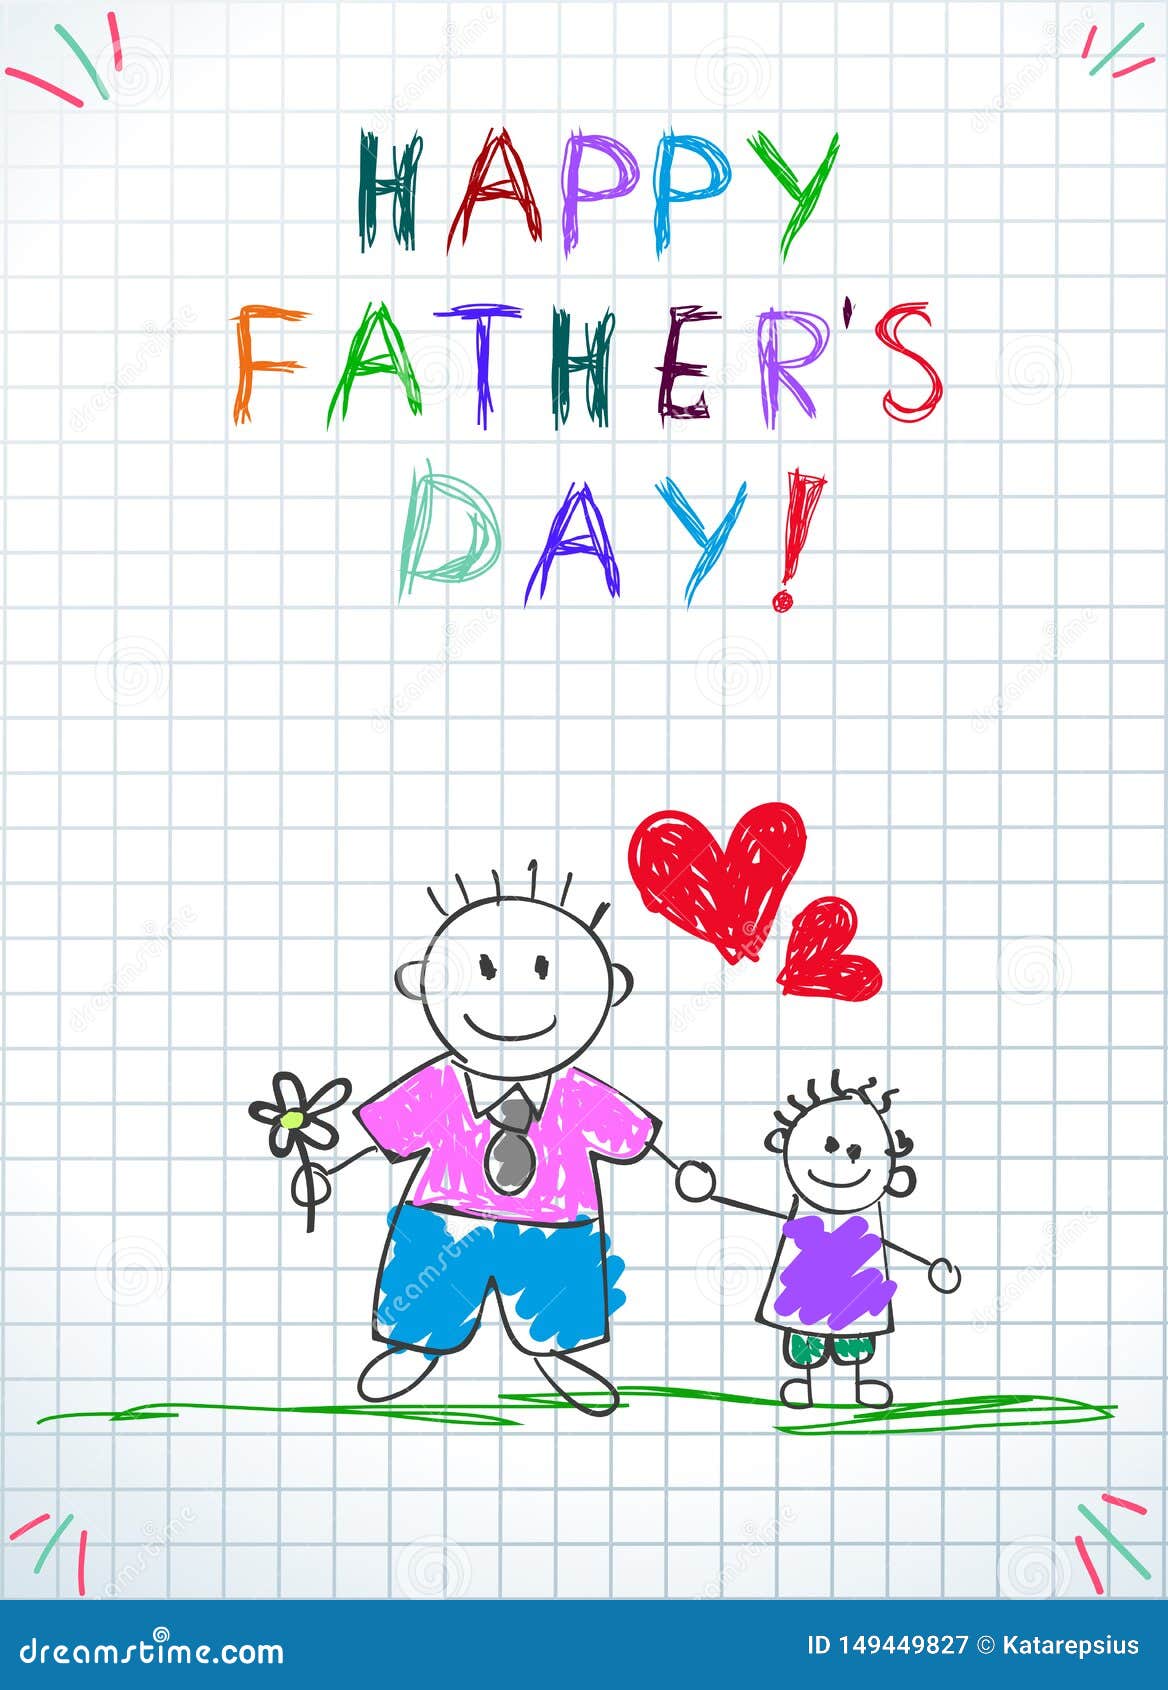 Sweet Father's Day Card Daddy & Son Holding Hands In Field Watching Dragonflies 